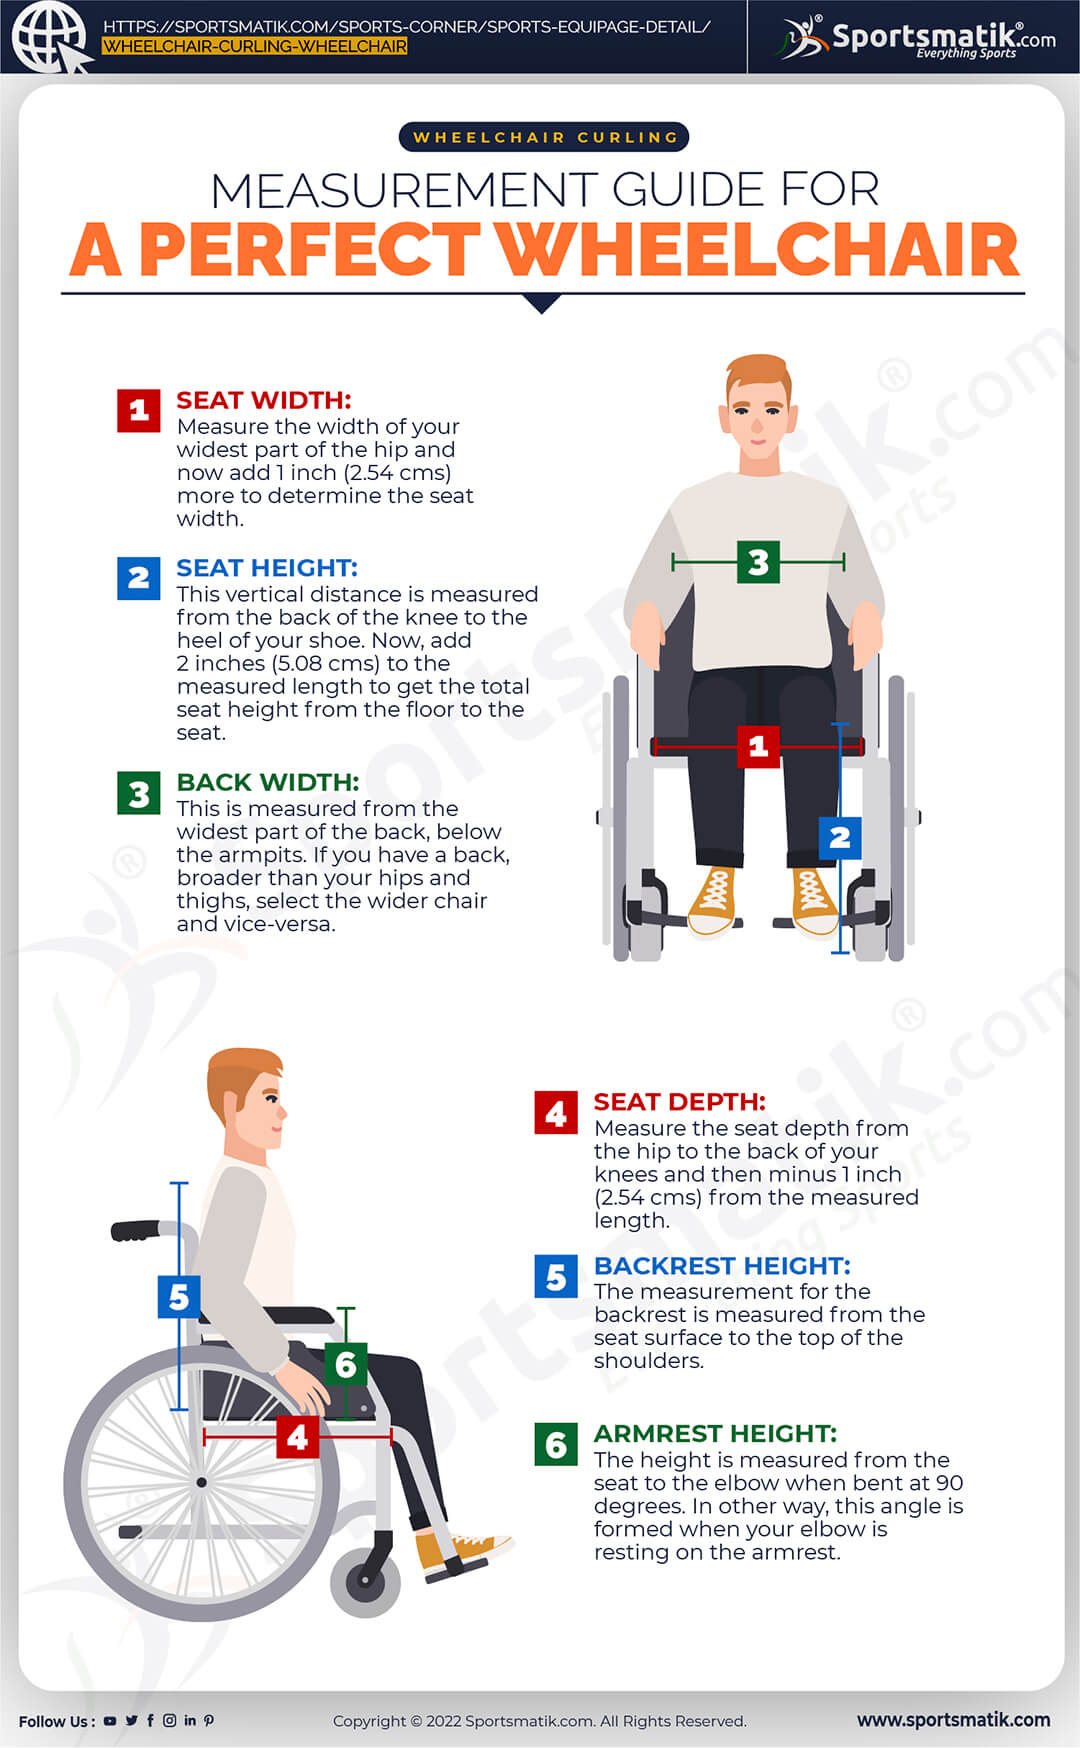 Measurements required for a perfect Wheelchair